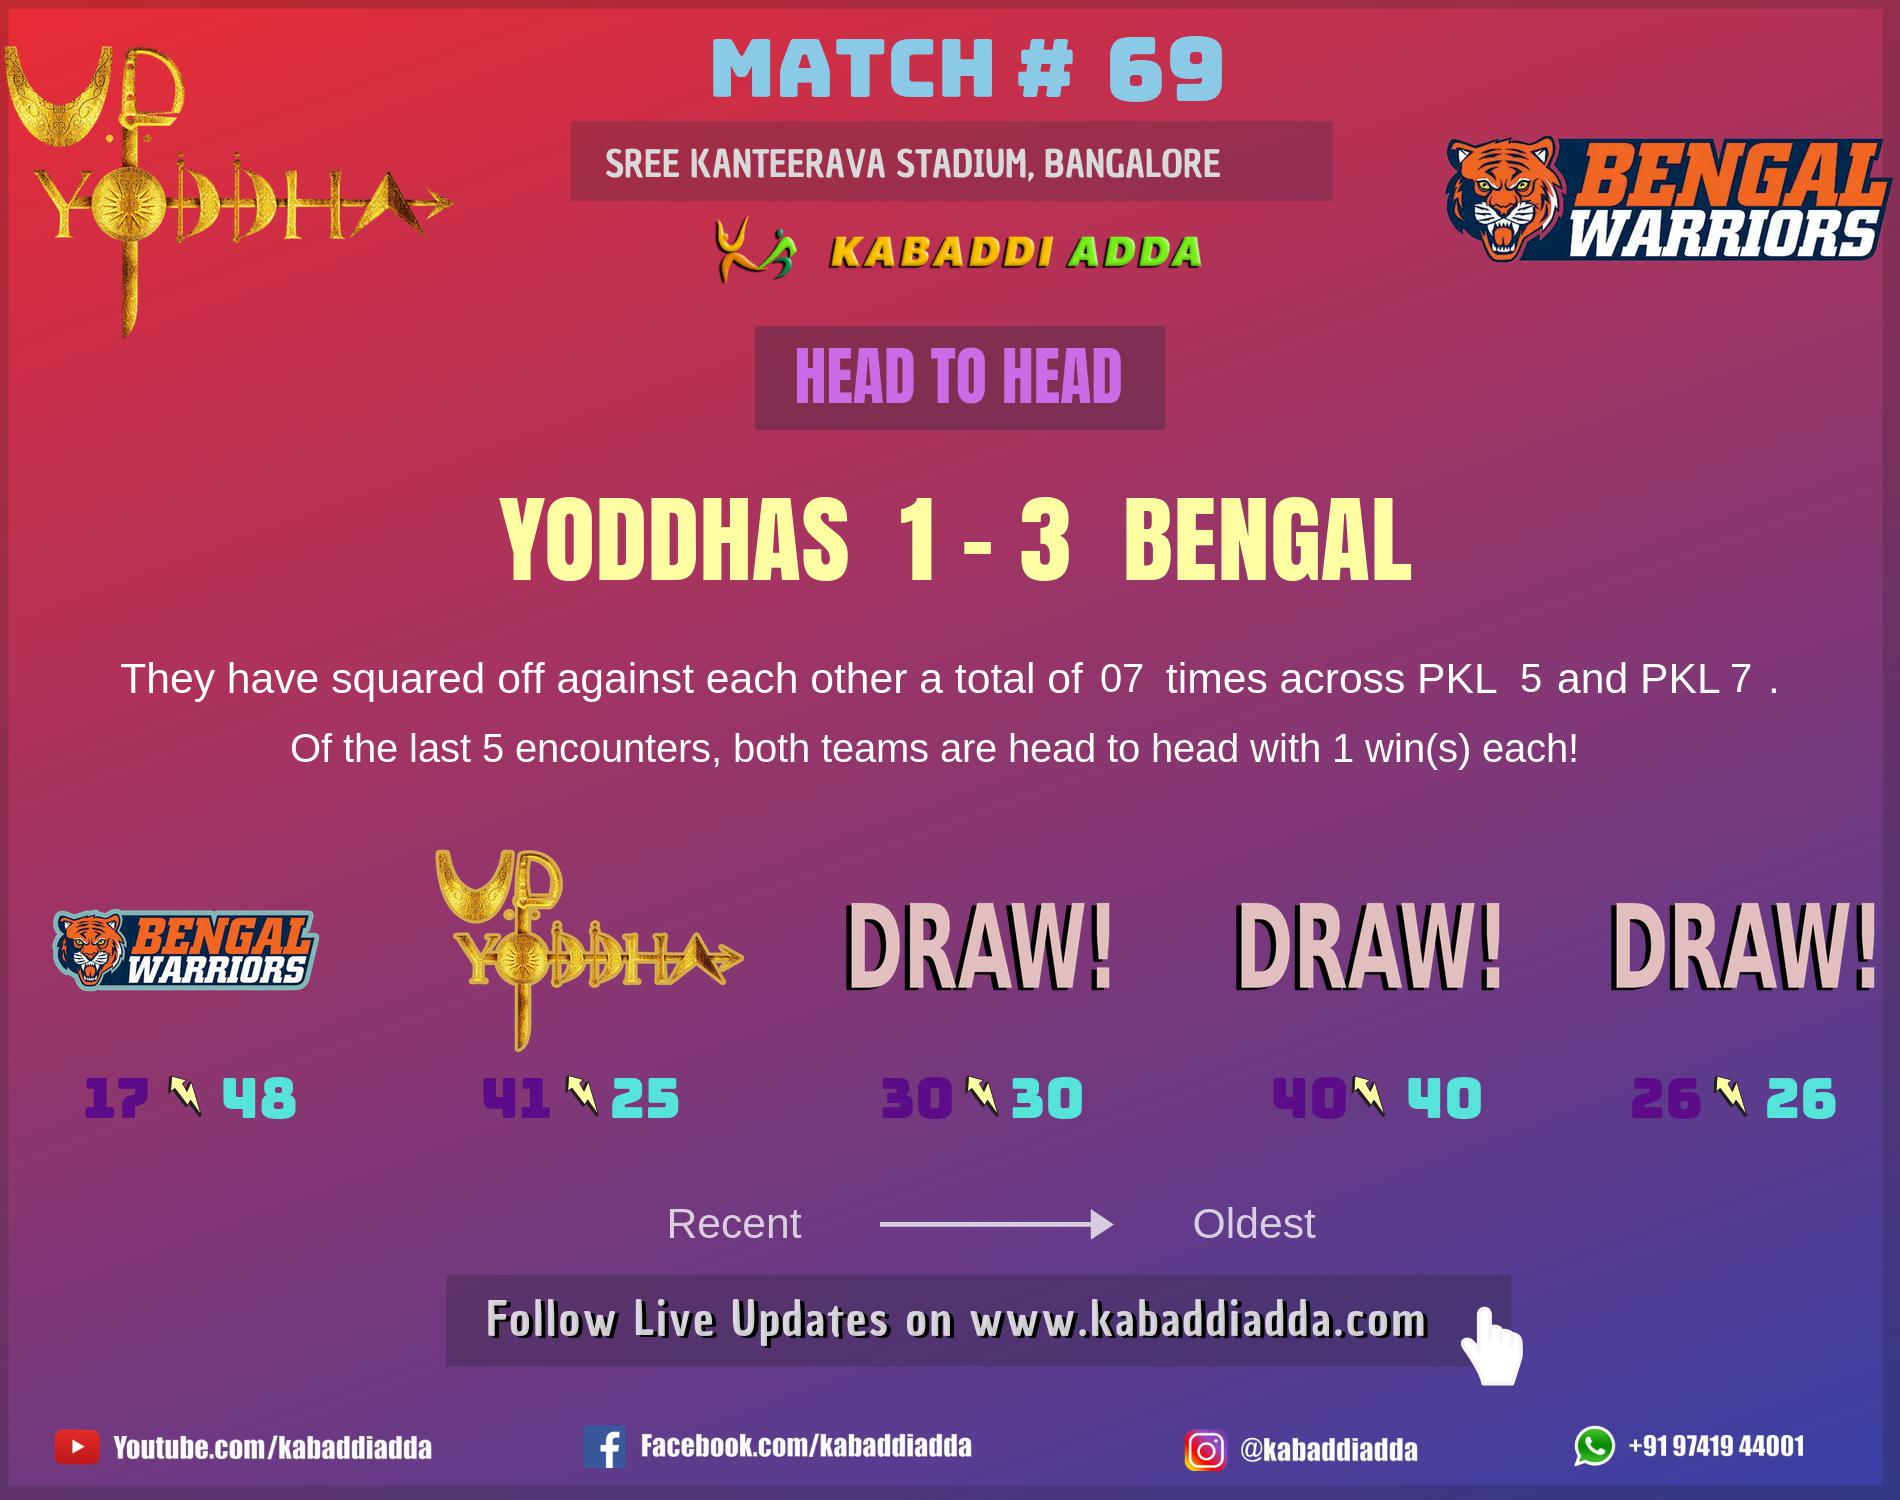 UP Yoddhas is playing against Bengal Warriors